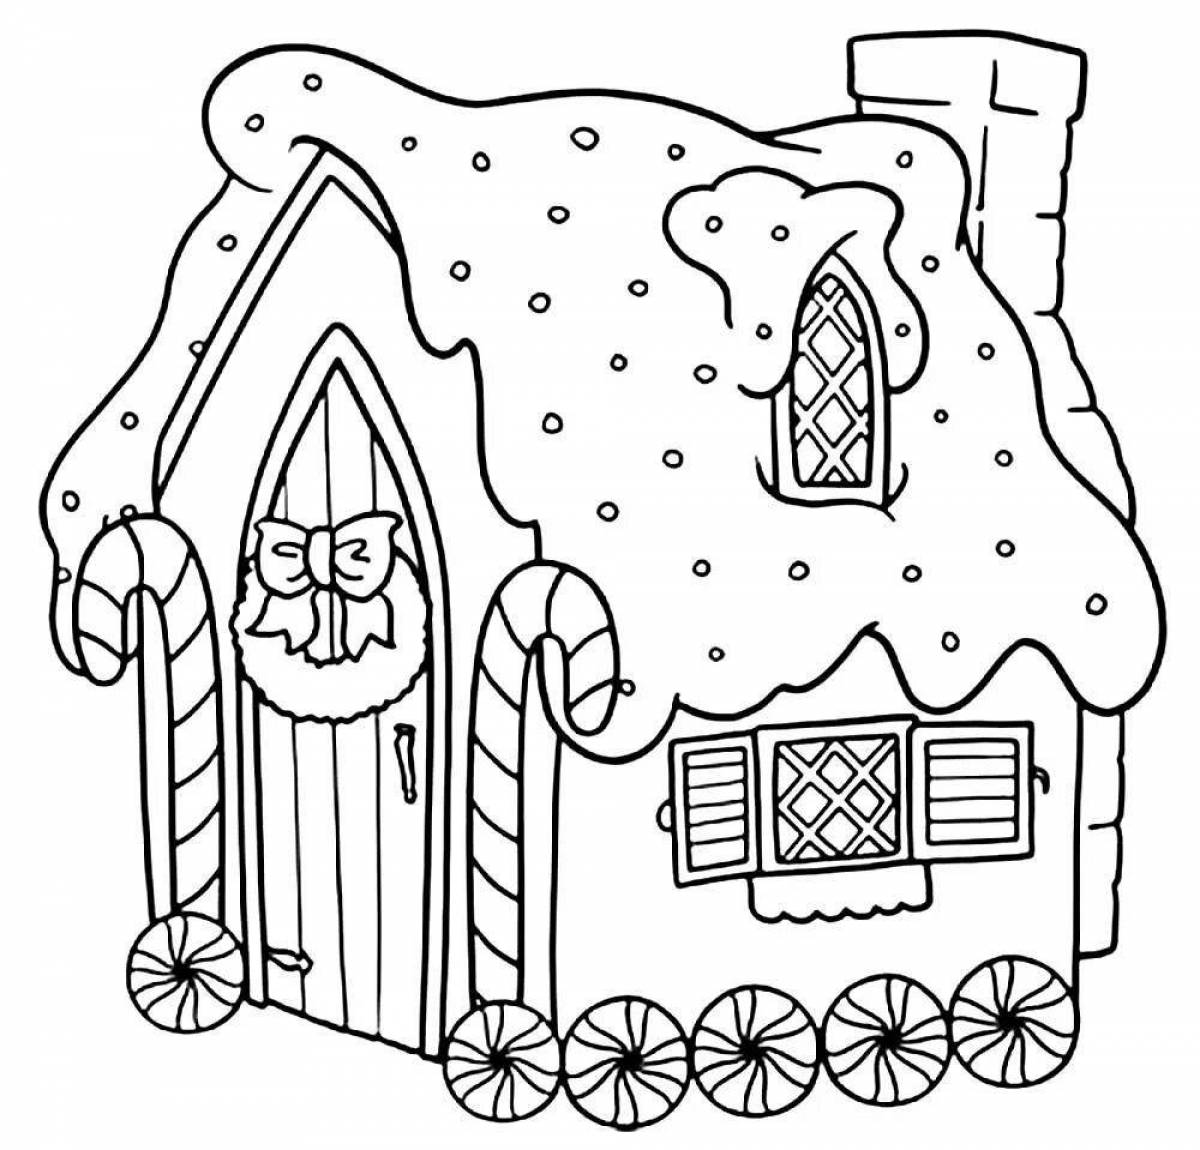 Magic winter house coloring book for kids